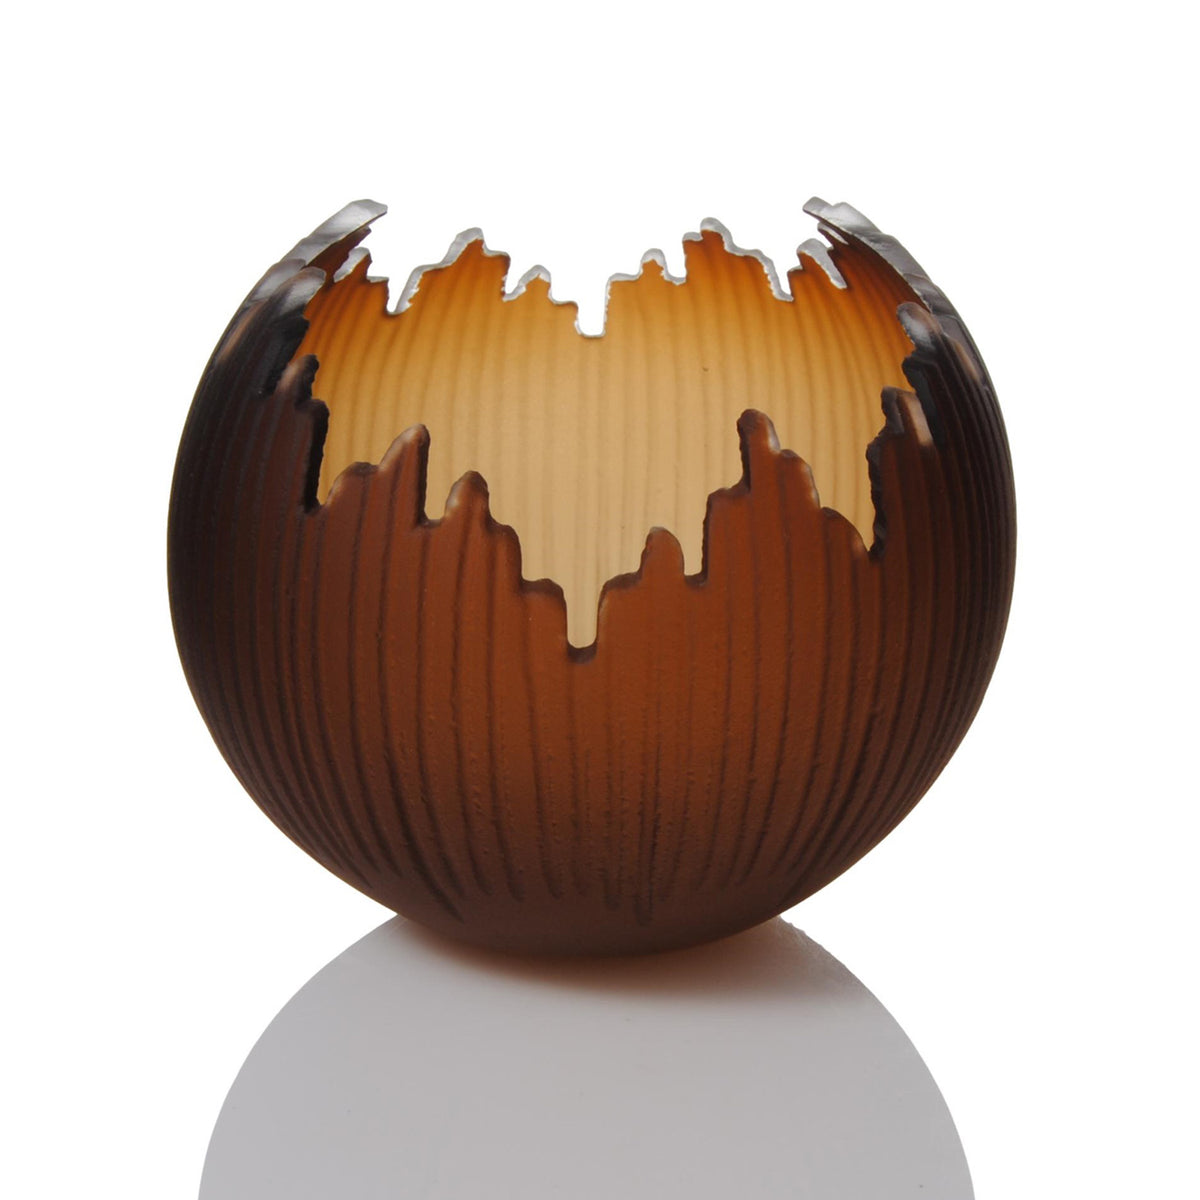 Courtney Downman - Brown Saw Carved Orb 6.5"